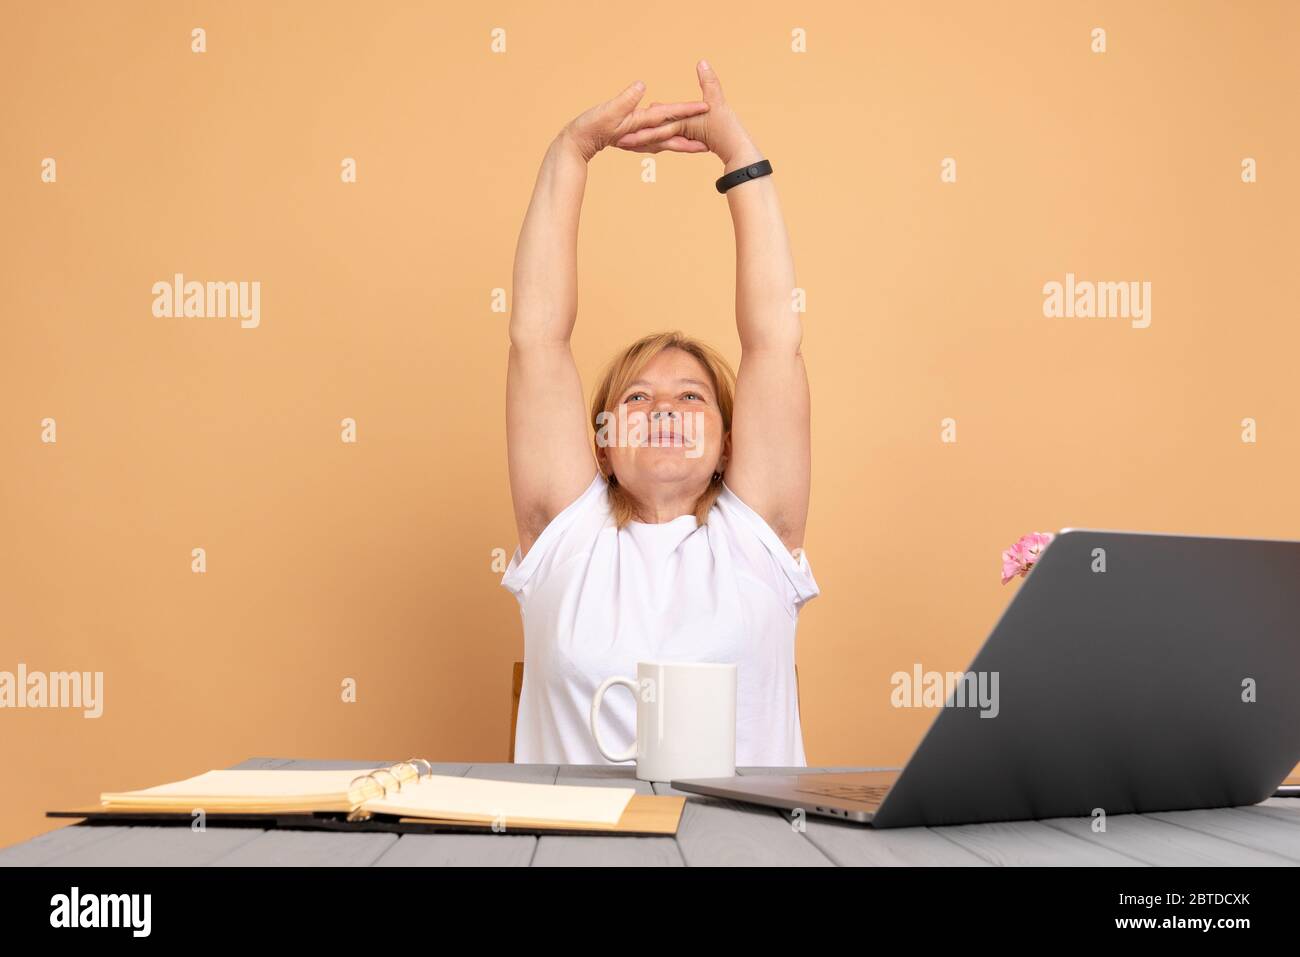 Senior woman sitting at the table with laptop, resting with raised hands, showing hairy unshaven female armpits. Body positive trend Stock Photo